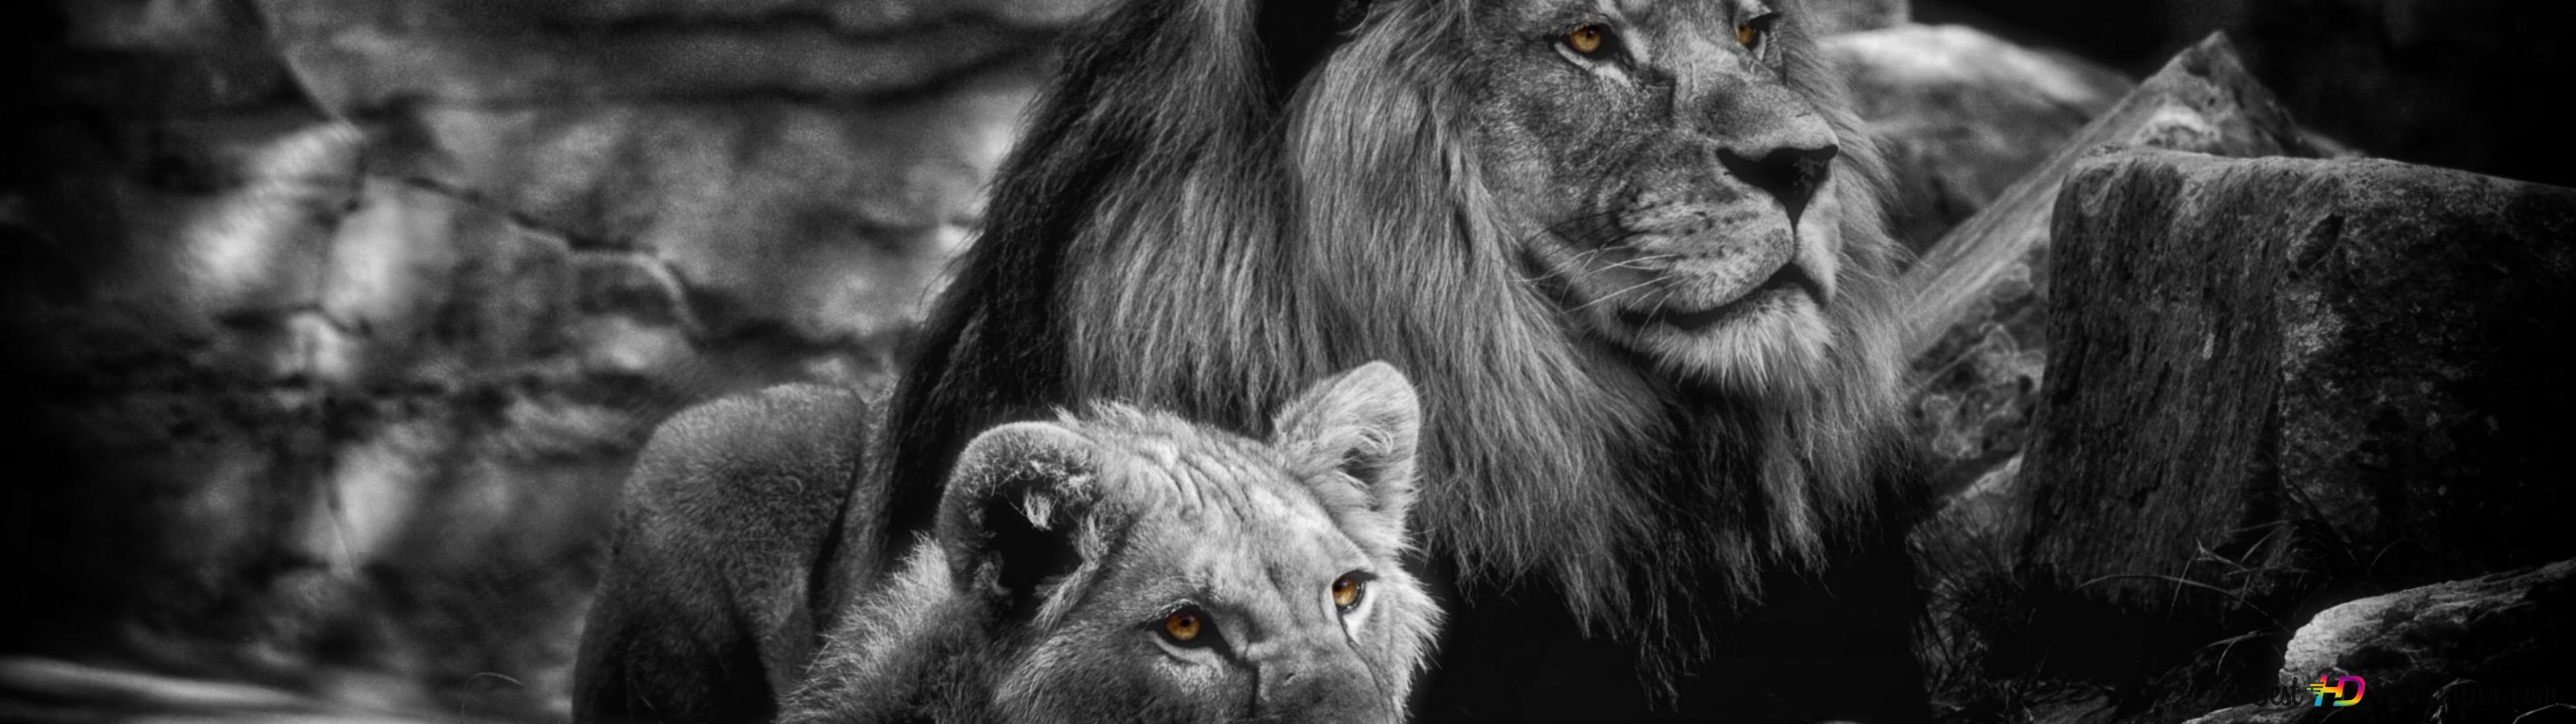 Male and Female Lion 4K wallpaper download